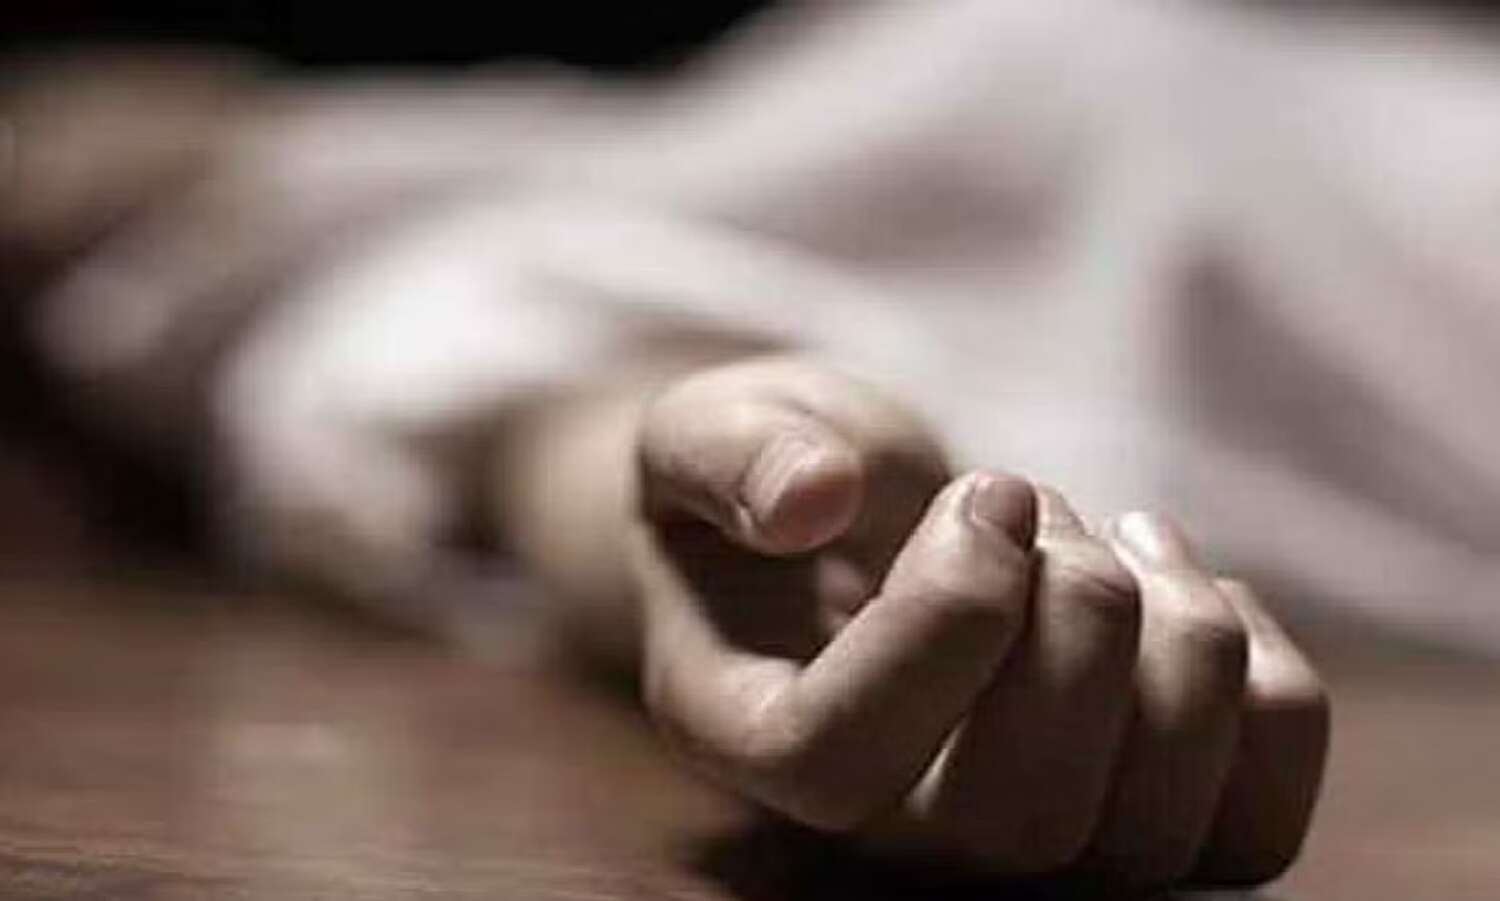 UP boy killed on advice of occultist